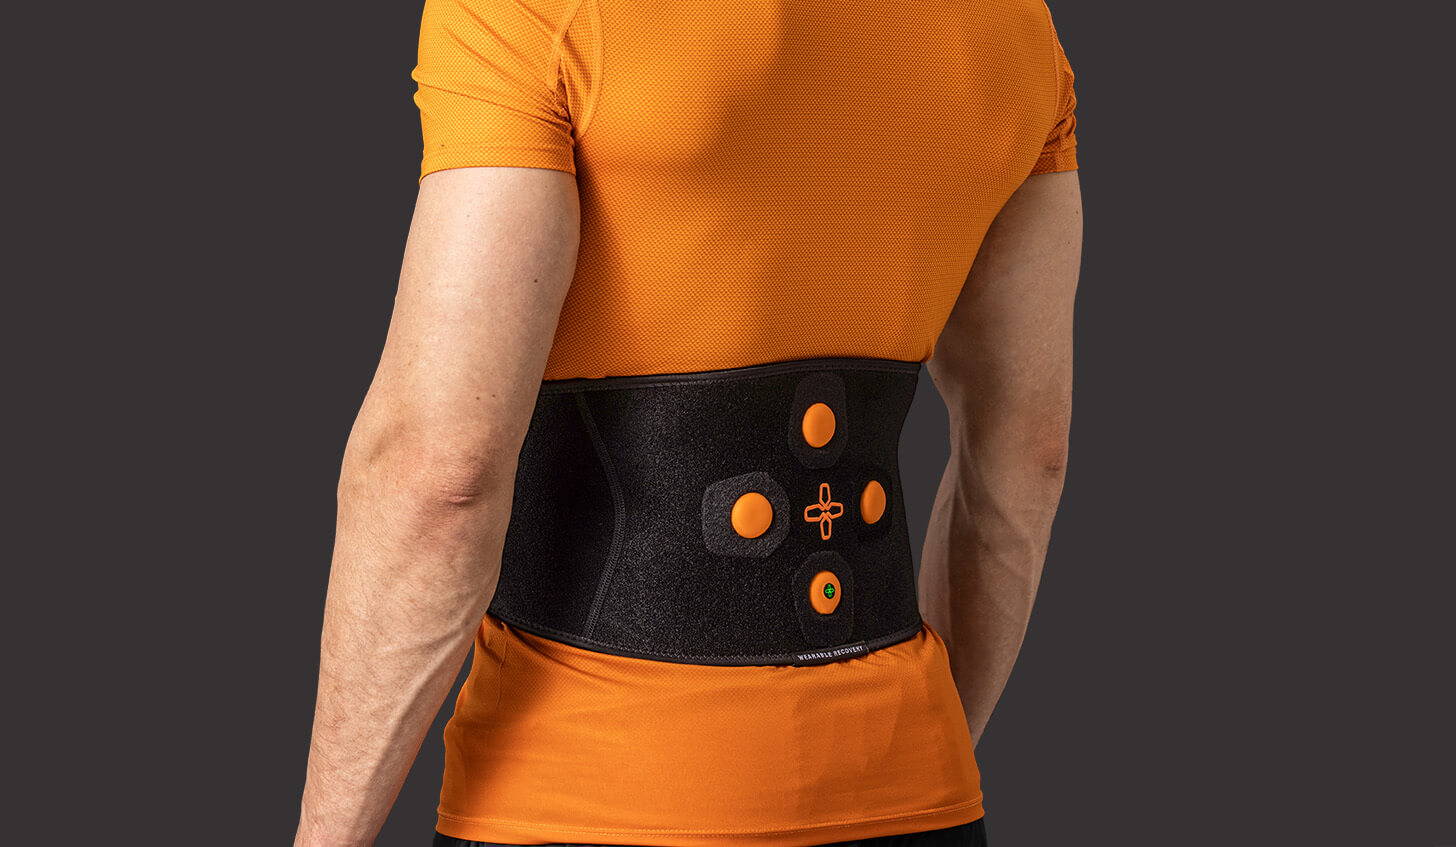 Myovolt vibration therapy device for lower back muscle recovery treatment worn by a male athlete.